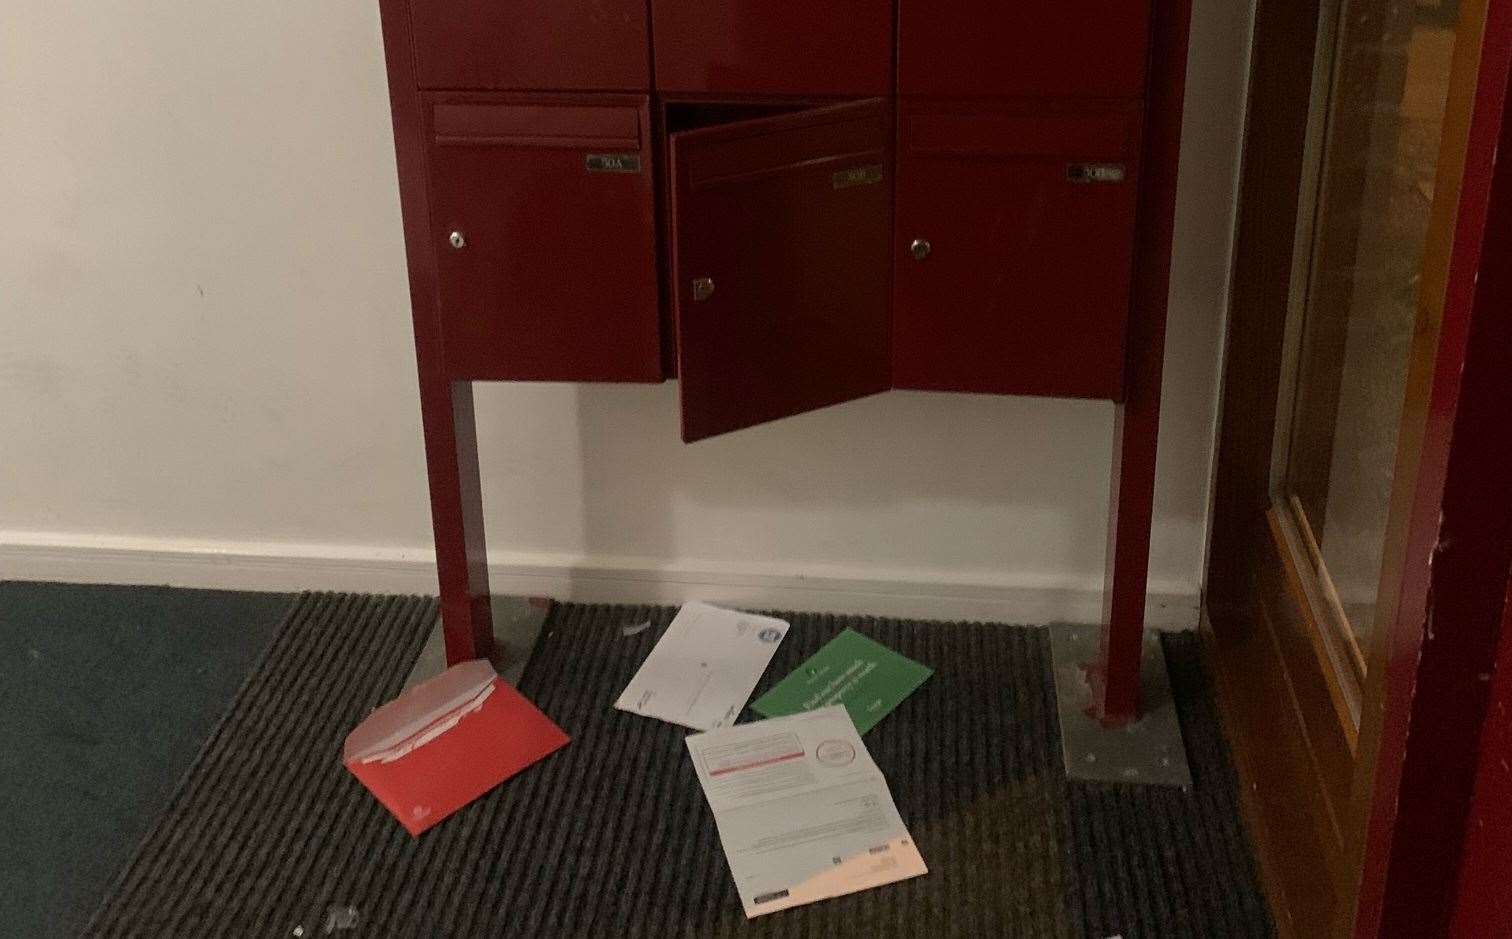 Residents’ letter boxes were also broken into